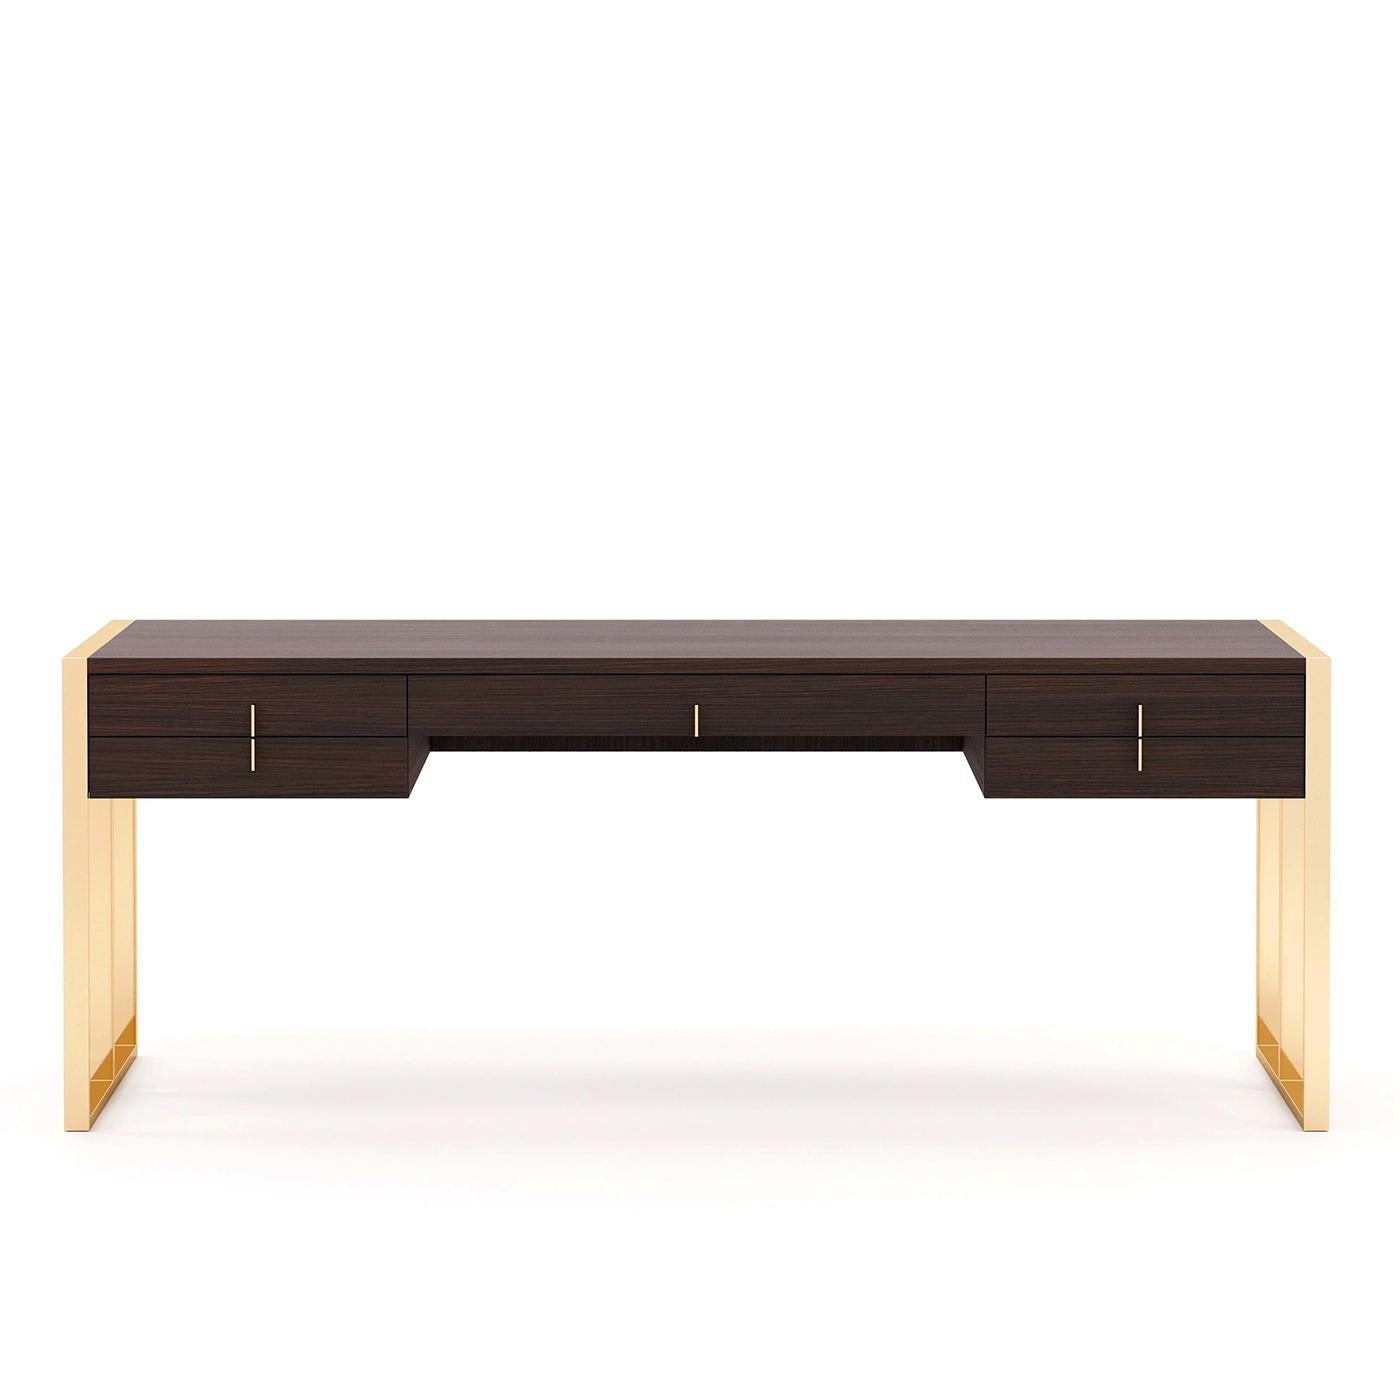 Desk Capton with structure in smocked eucalyptus veneered
wood in matte finish, with 5 drawers with easy glide system. 
With base in polished stainless steel in gold finish.
Also available in ebony matte finish, or grey oak matte finish,
or